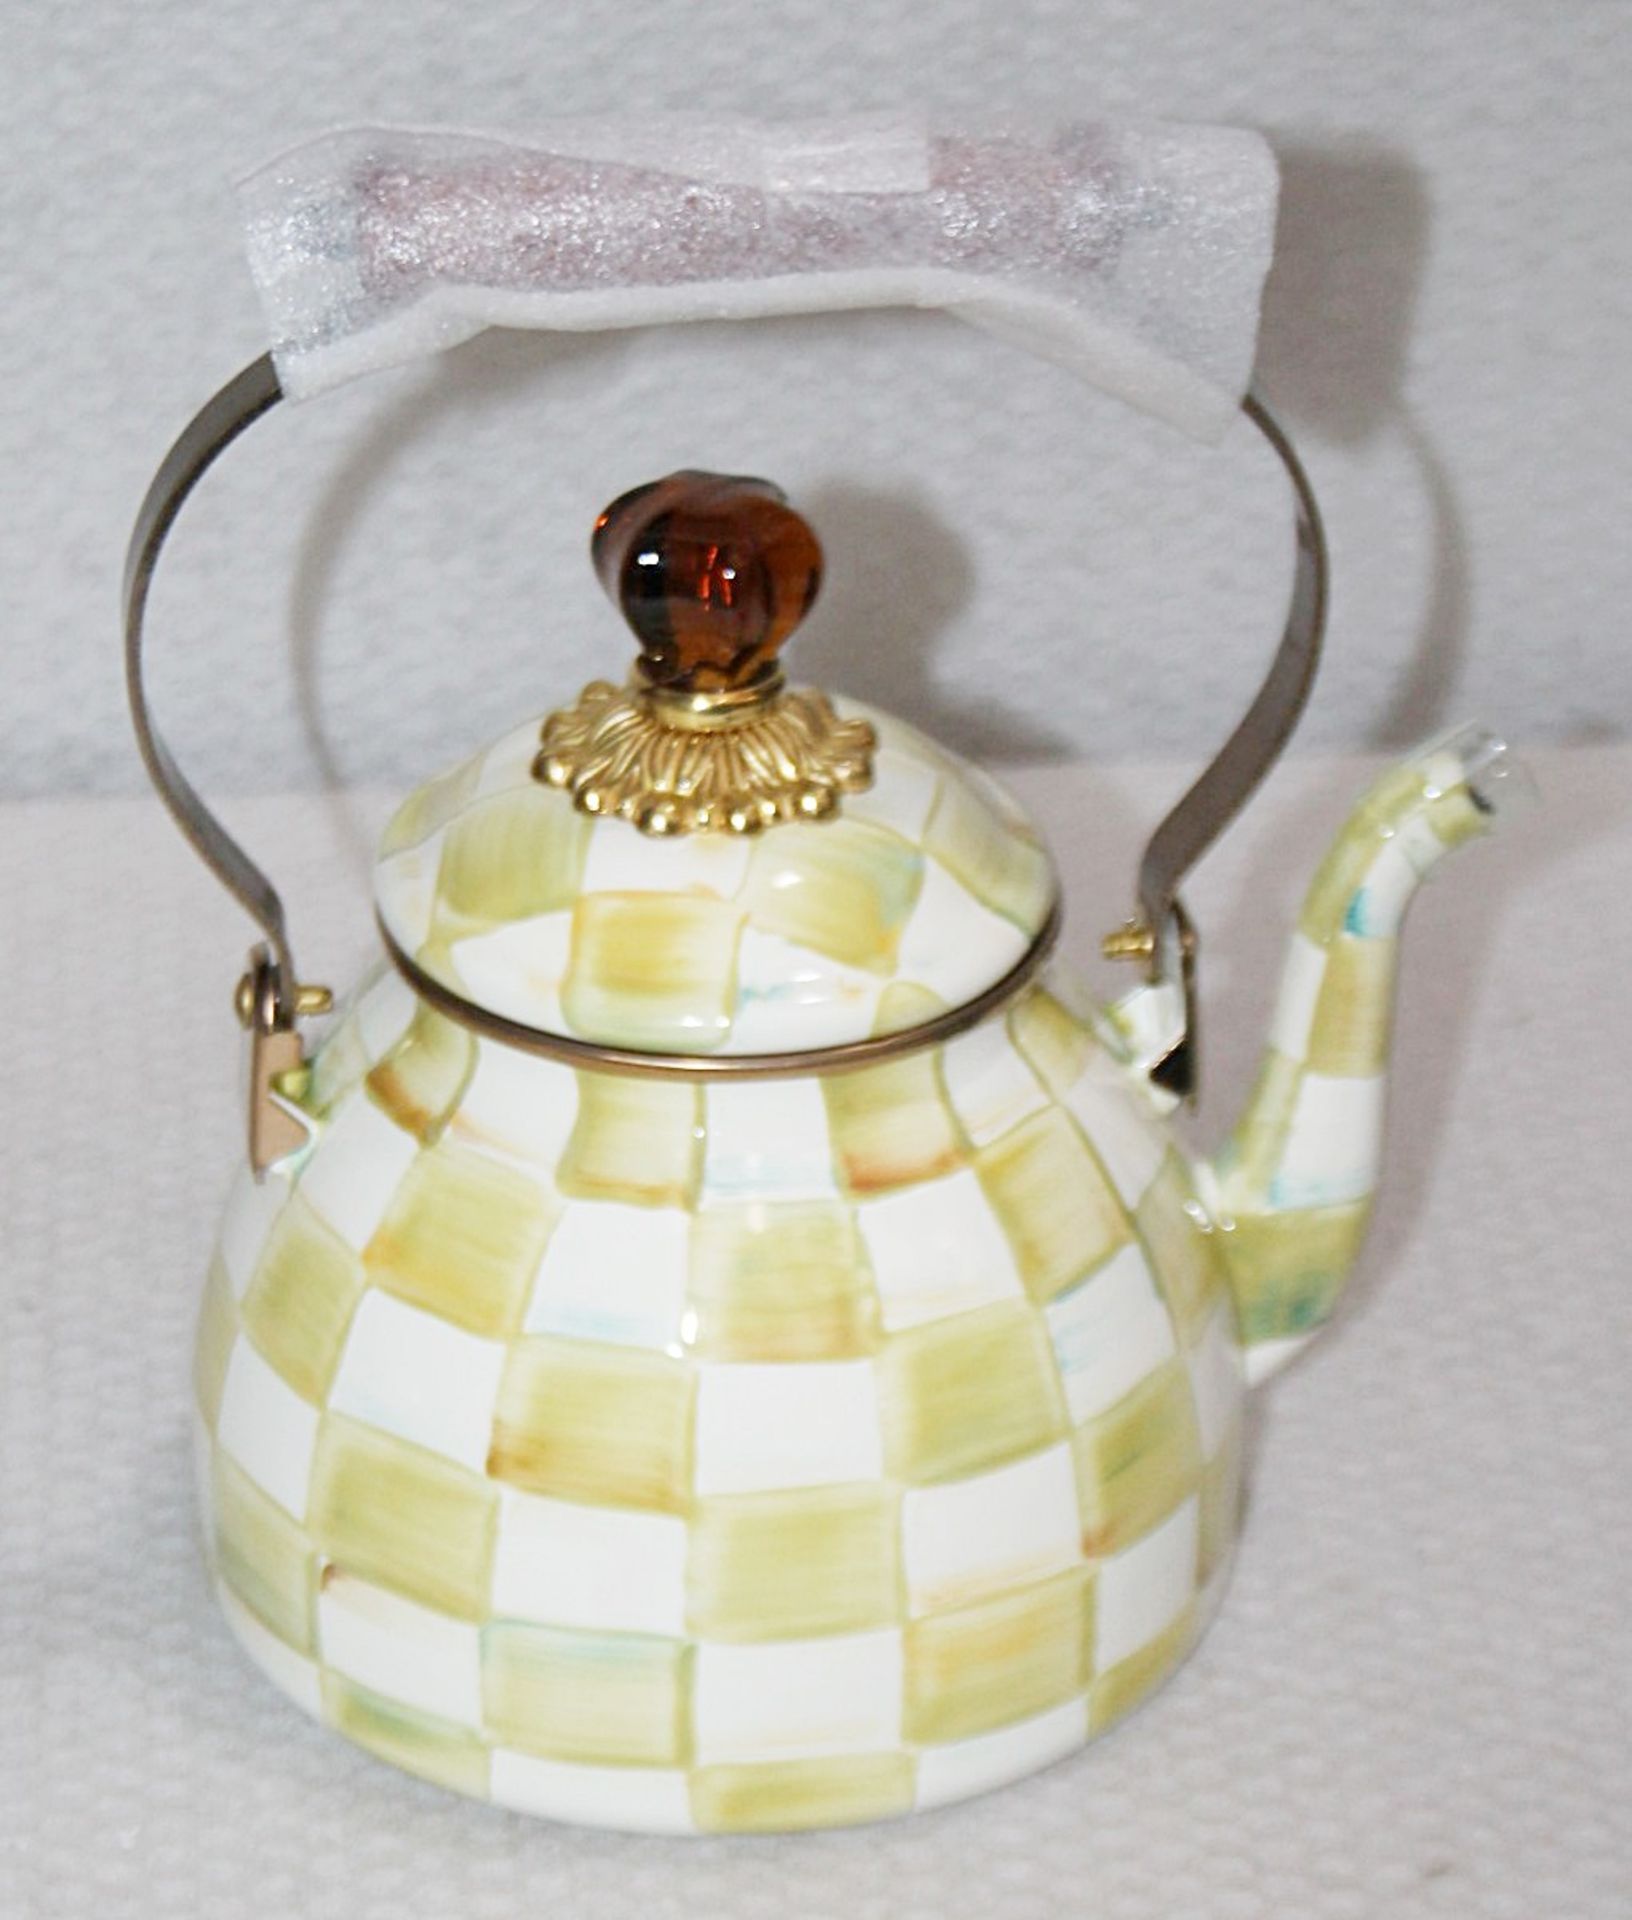 1 x MACKENZIE-CHILDS 'Parchment Check' Tea Kettle £197.00 - Unused Boxed Stock - Ref: HAS423/FEB22/ - Image 2 of 9